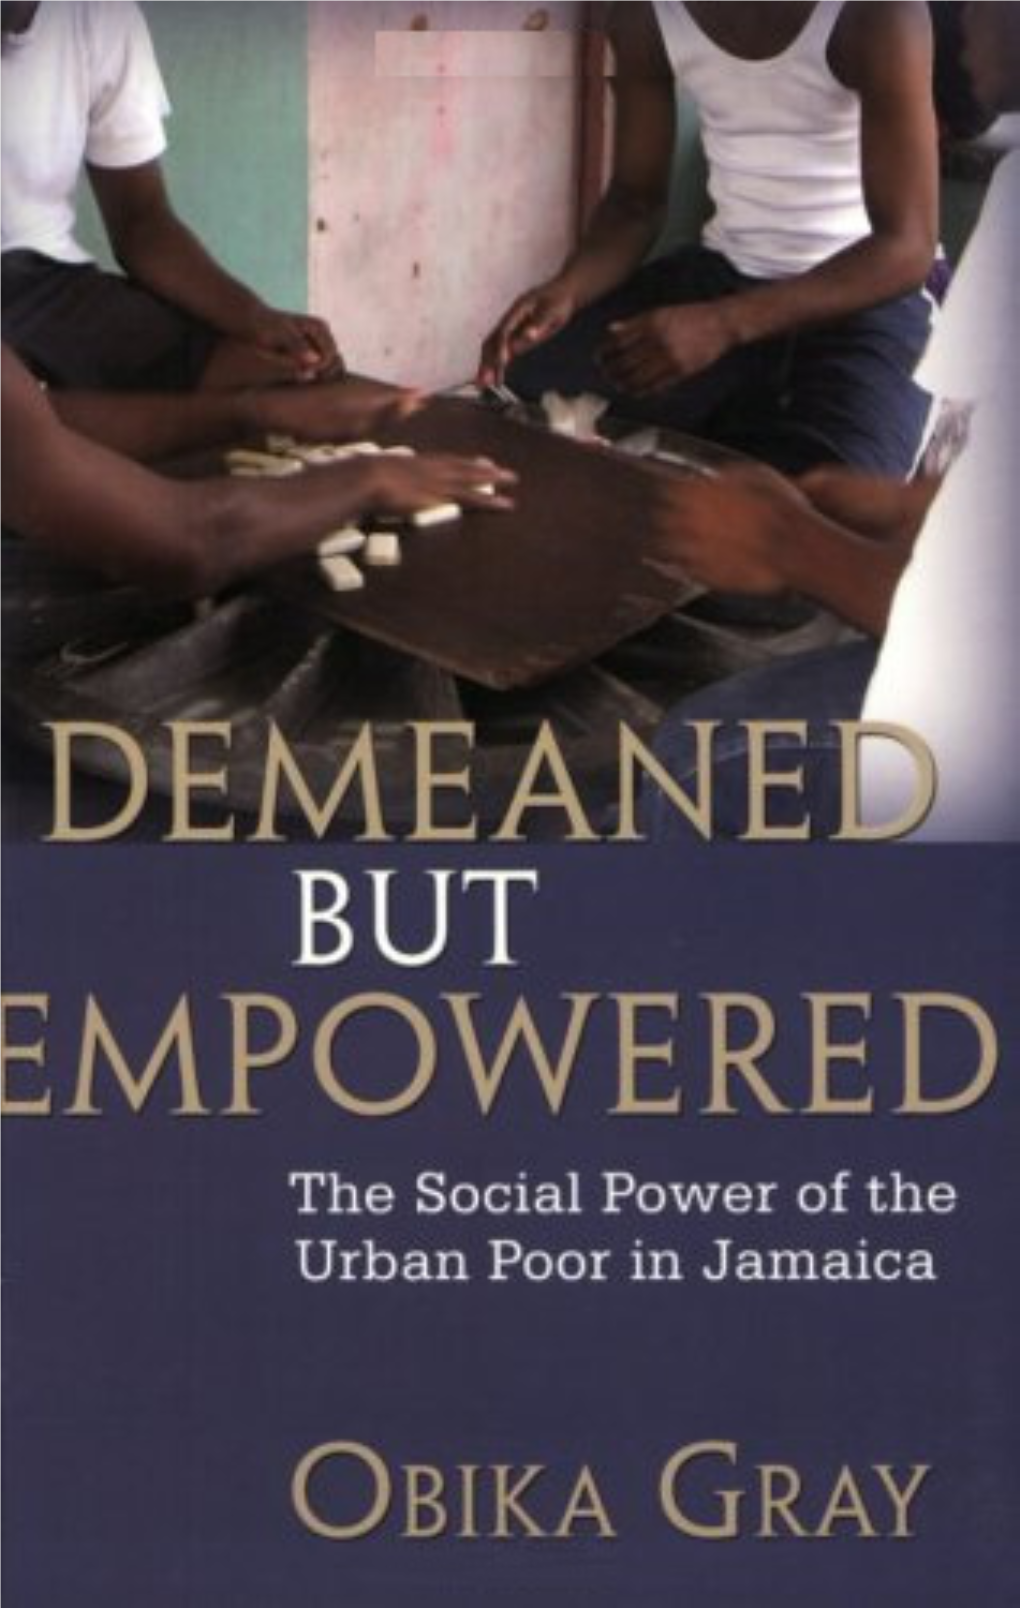 Demeaned but Empowered: the Social Power of the Urban Poor in Jamaica / Obika Gray